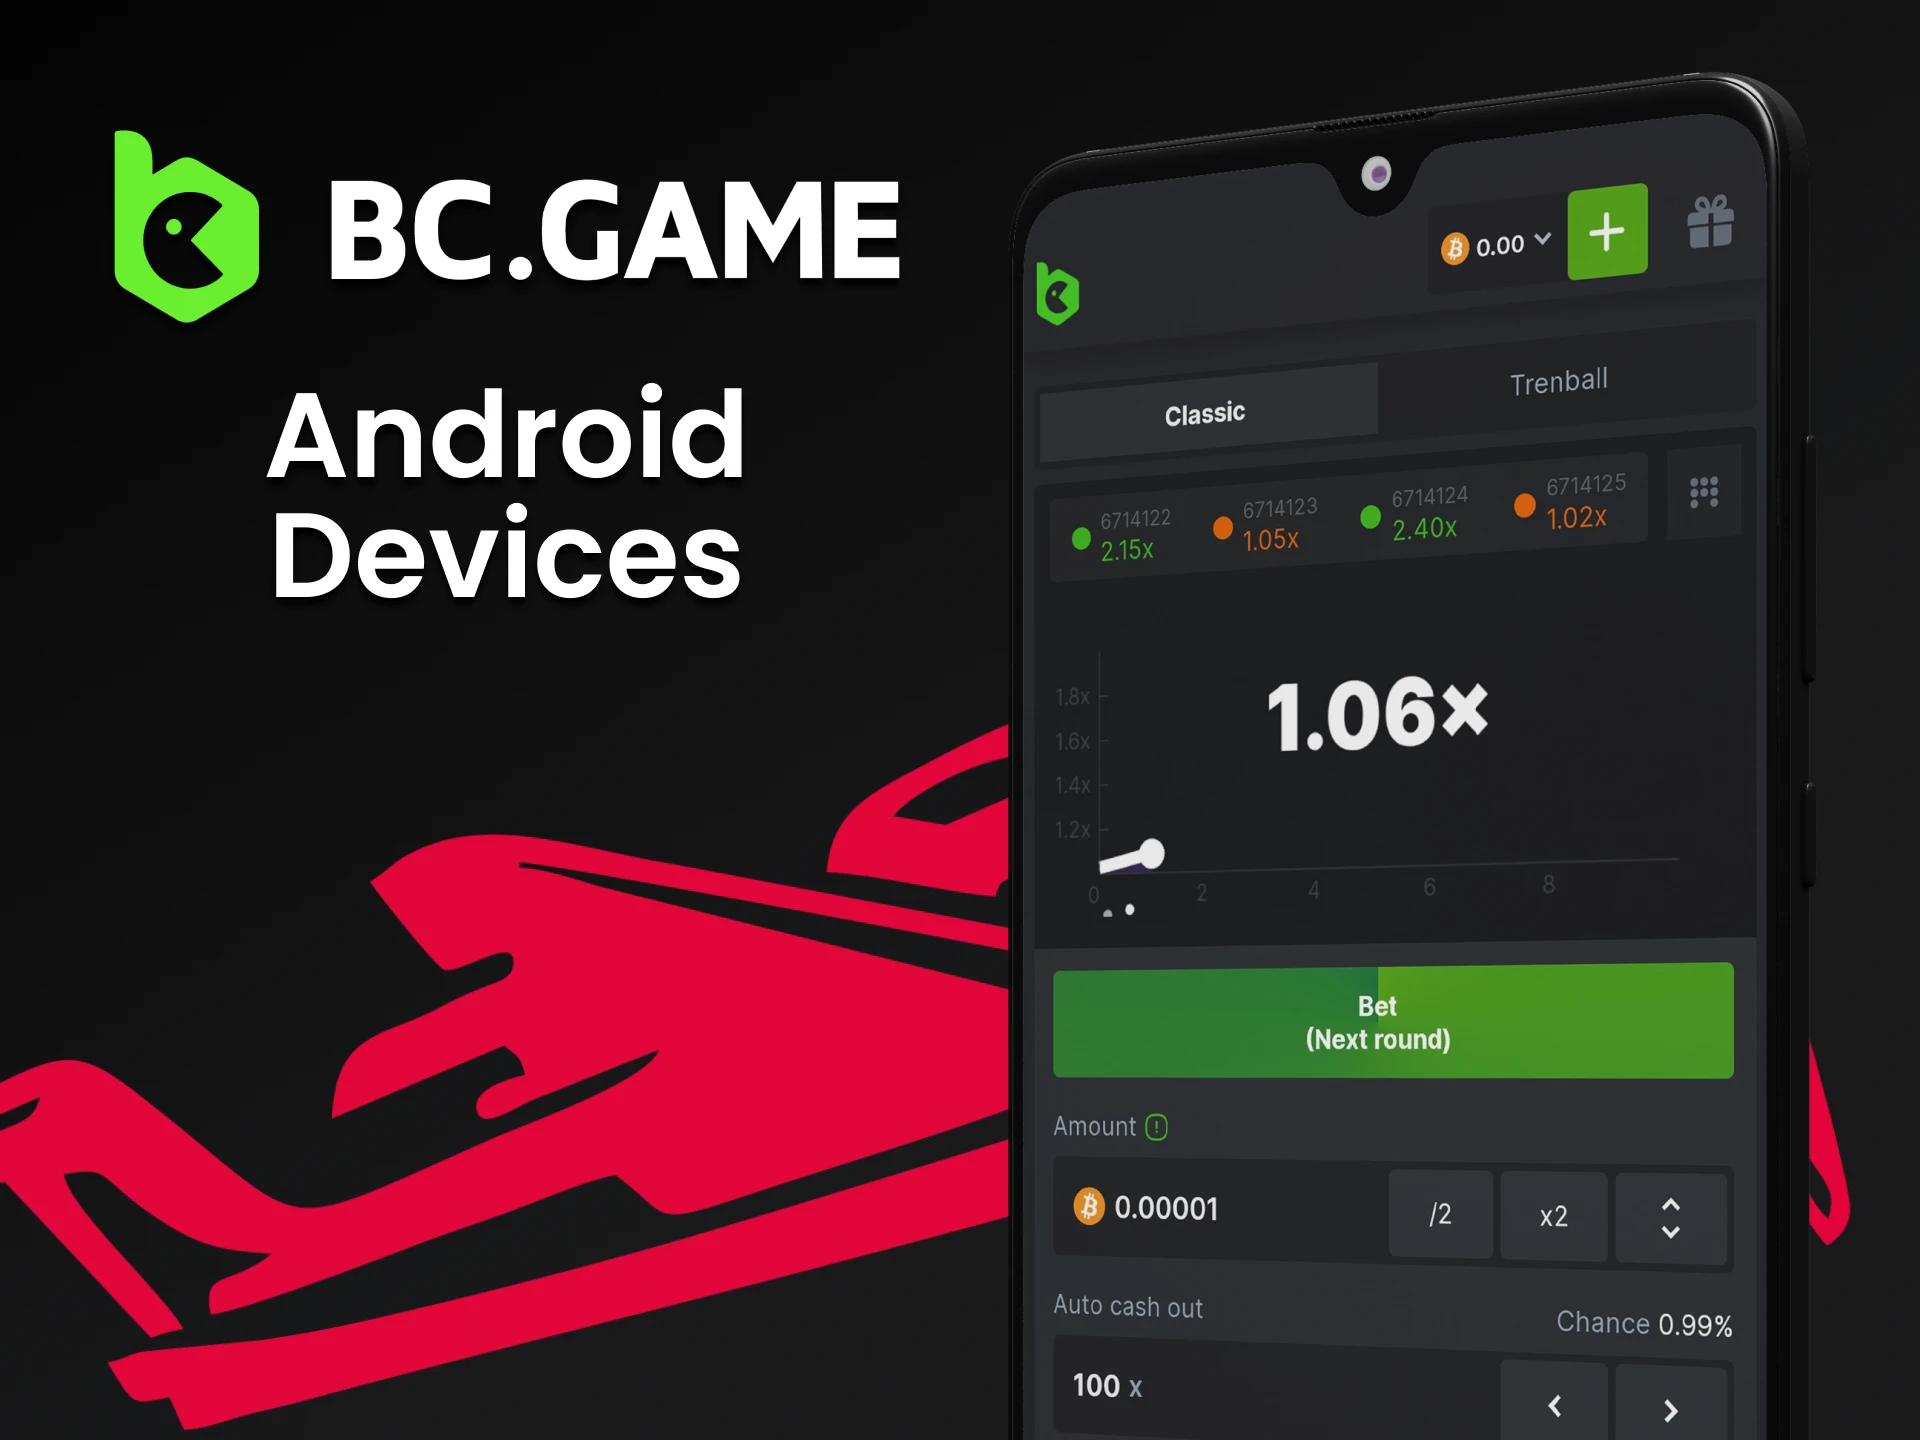 Install the BCGame application to play Aviator on Android.